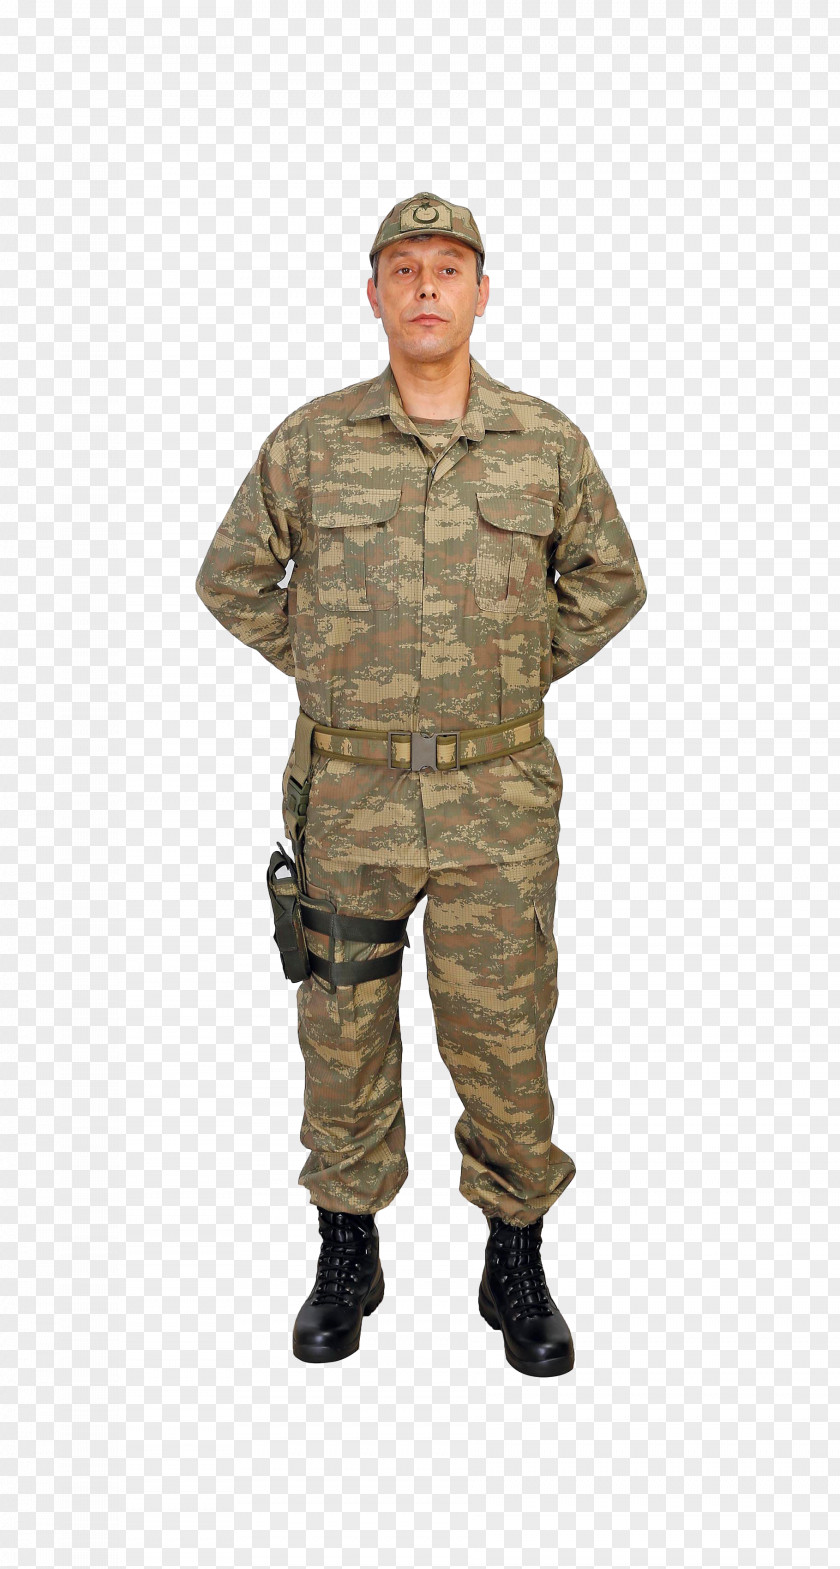 Uniform Soldier Military Education And Training Army PNG